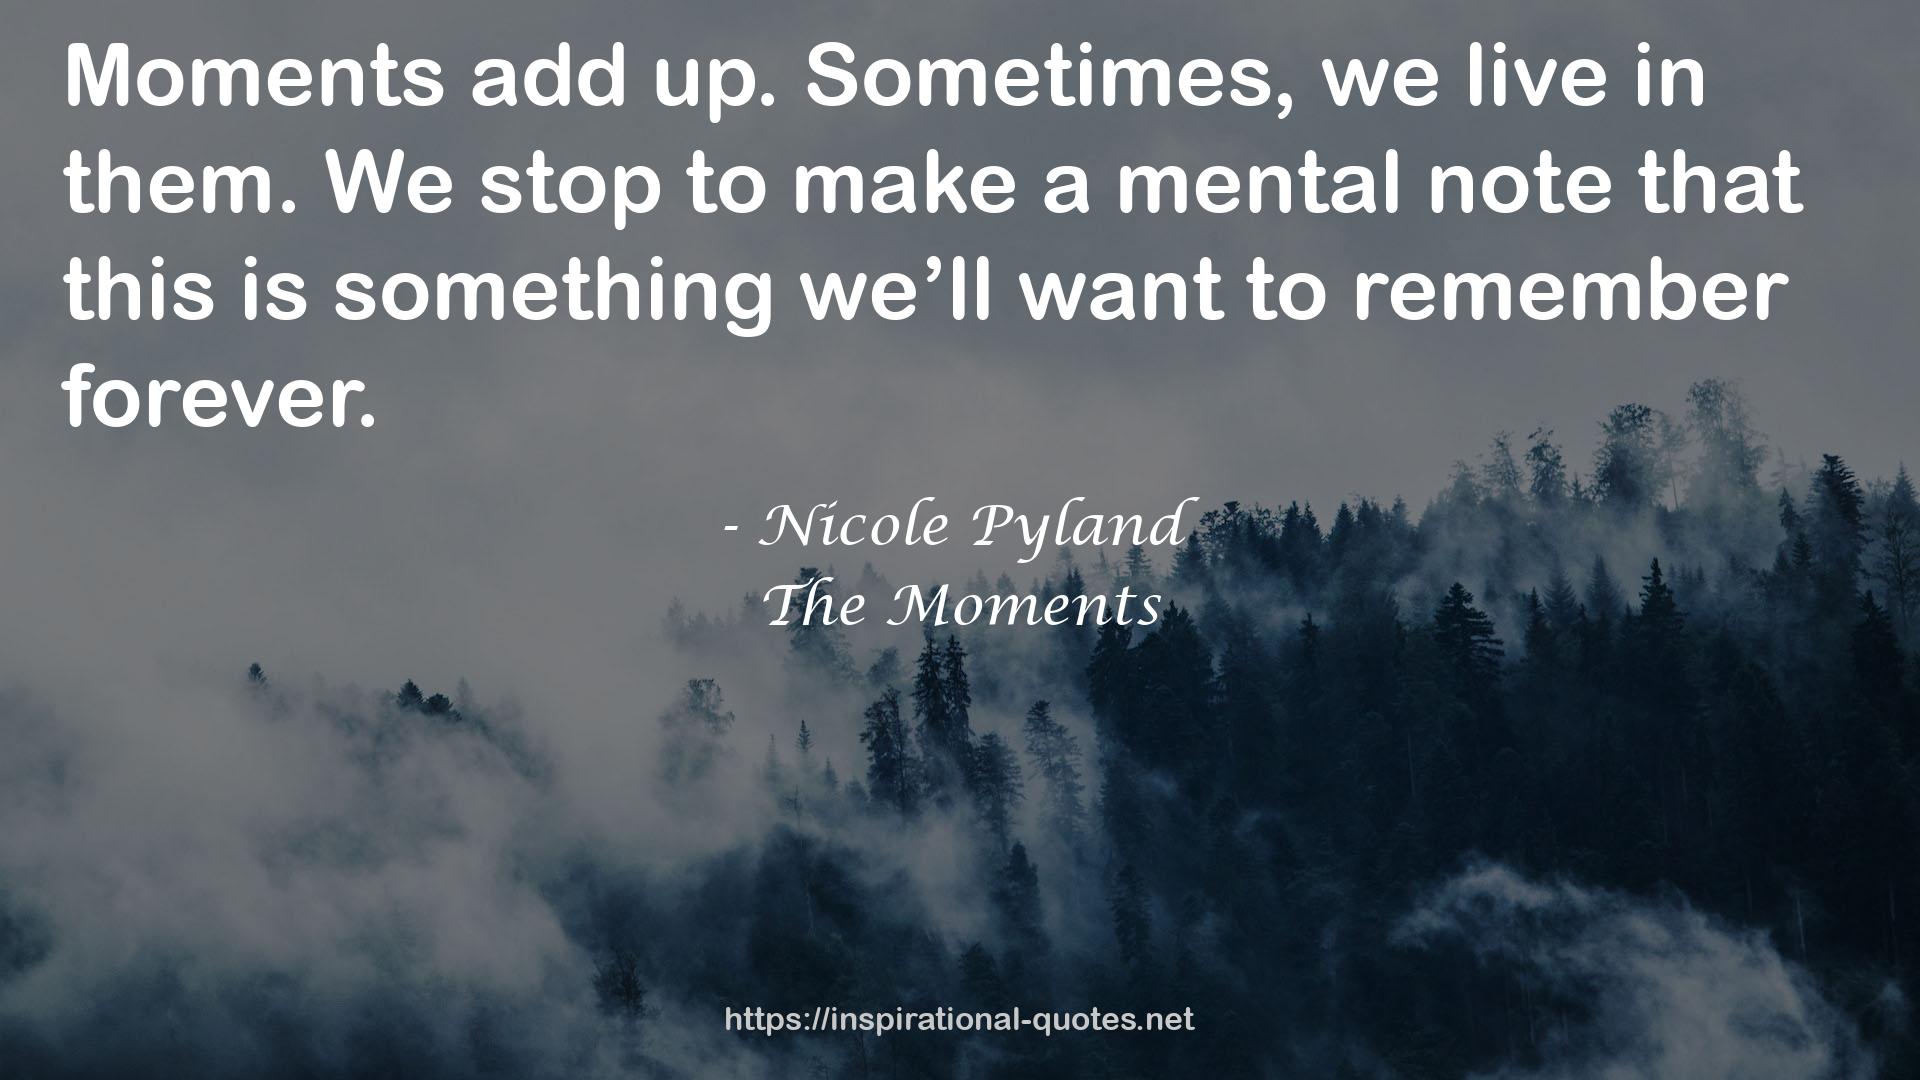 The Moments QUOTES